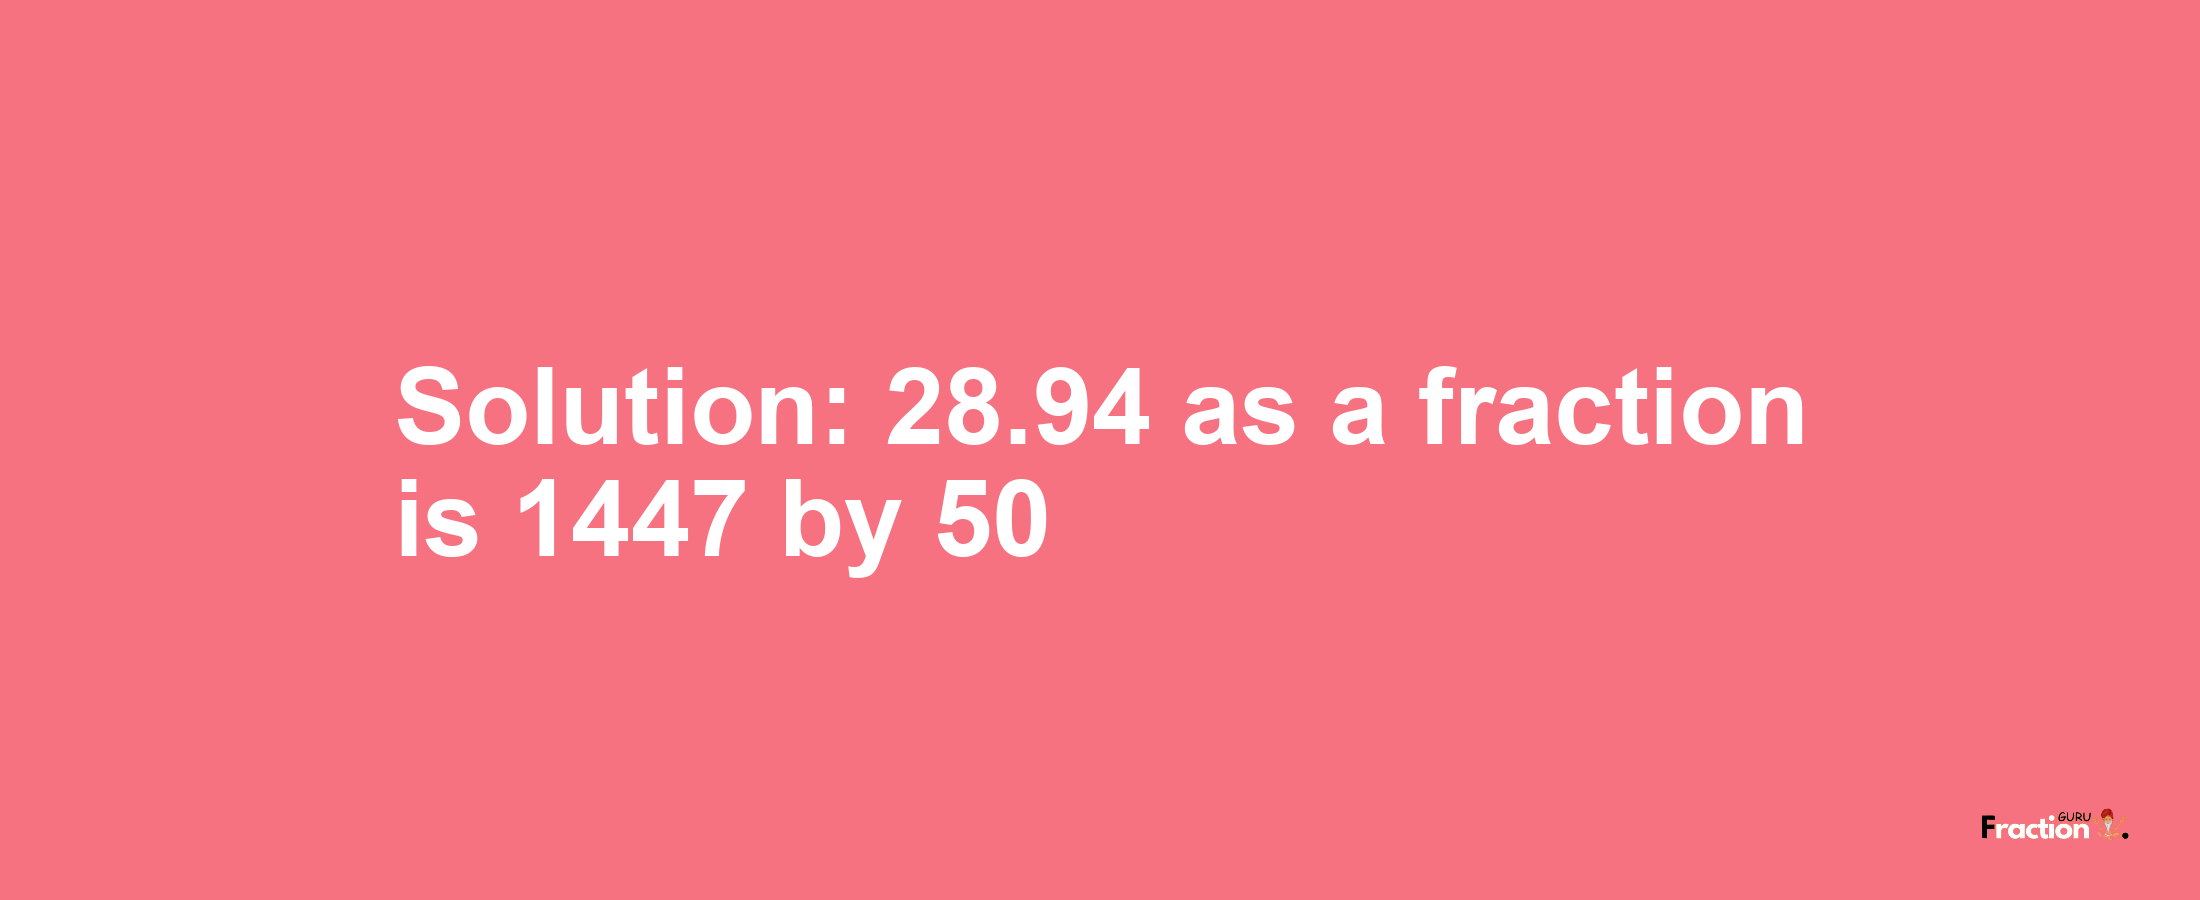 Solution:28.94 as a fraction is 1447/50